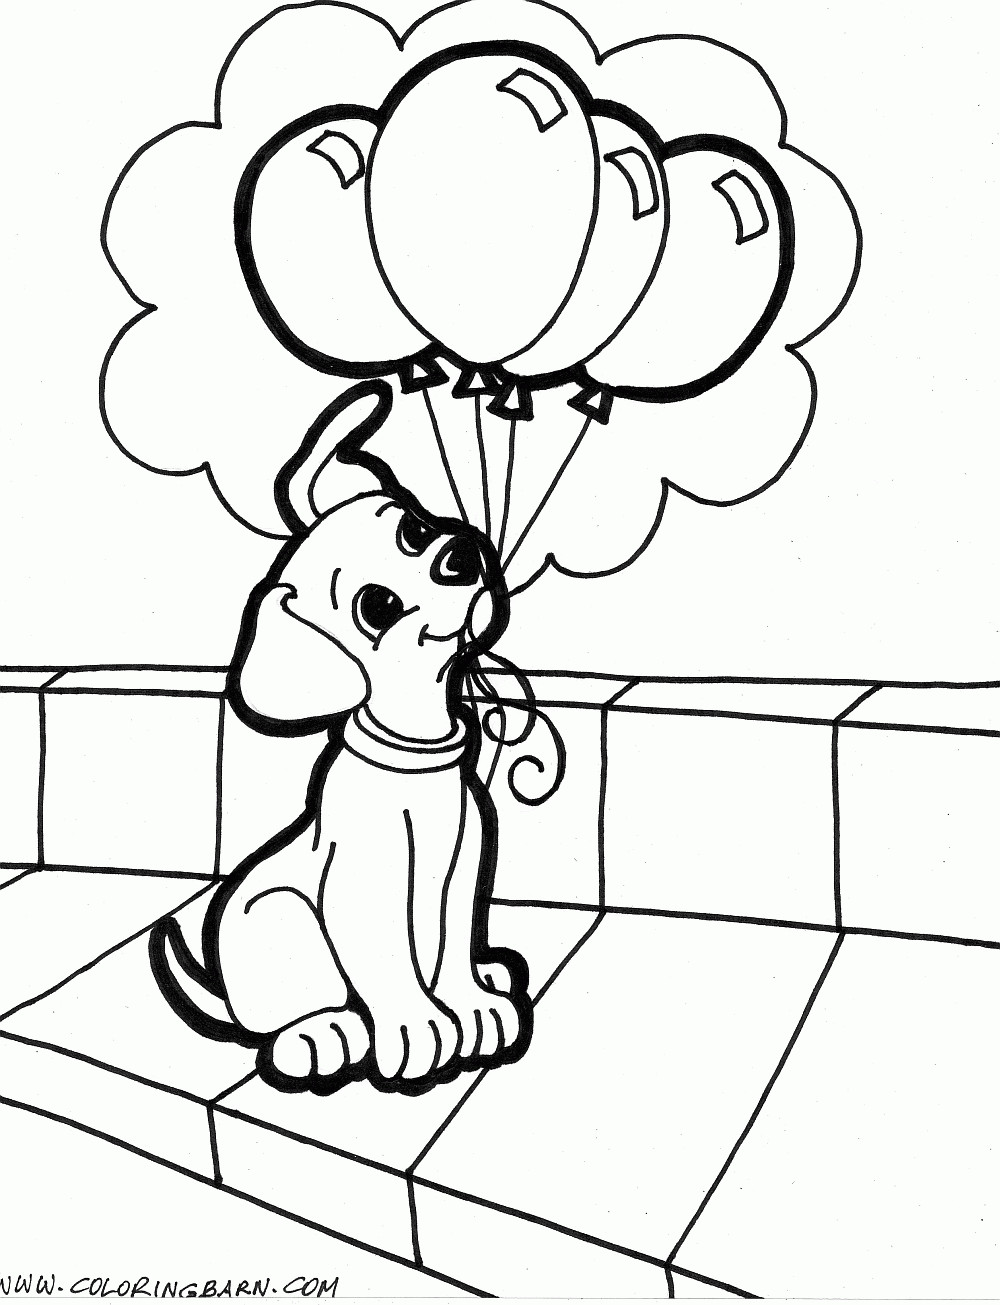 Puppy Dog Coloring Pages
 puppy coloring pages Free